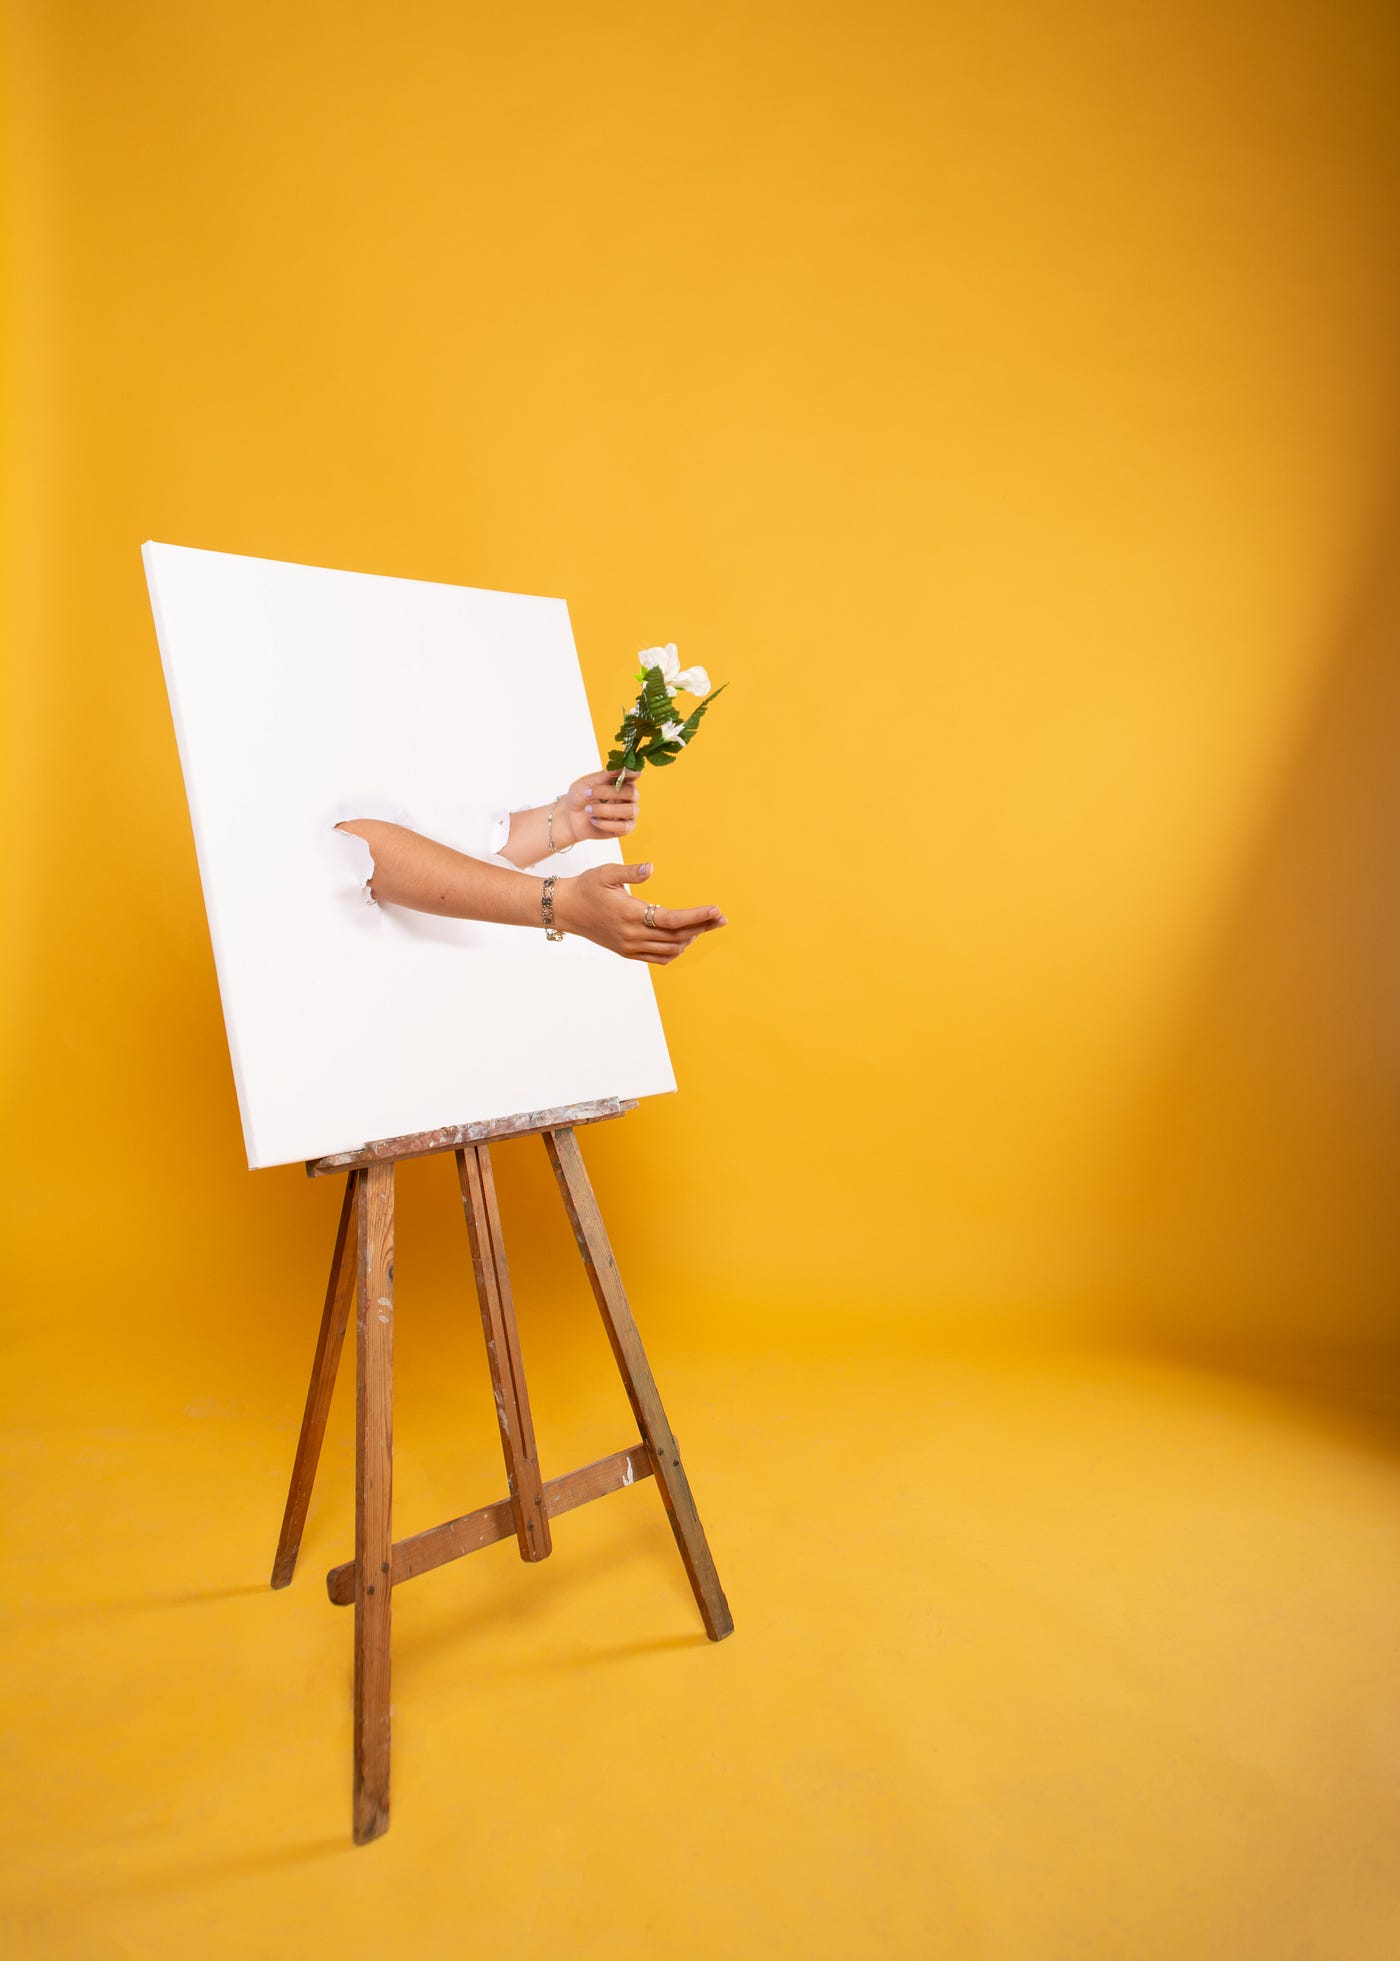 Transforming Your Blank Canvas. It's calling out to you. What will you… |  by Marjorie Dadhich | Medium